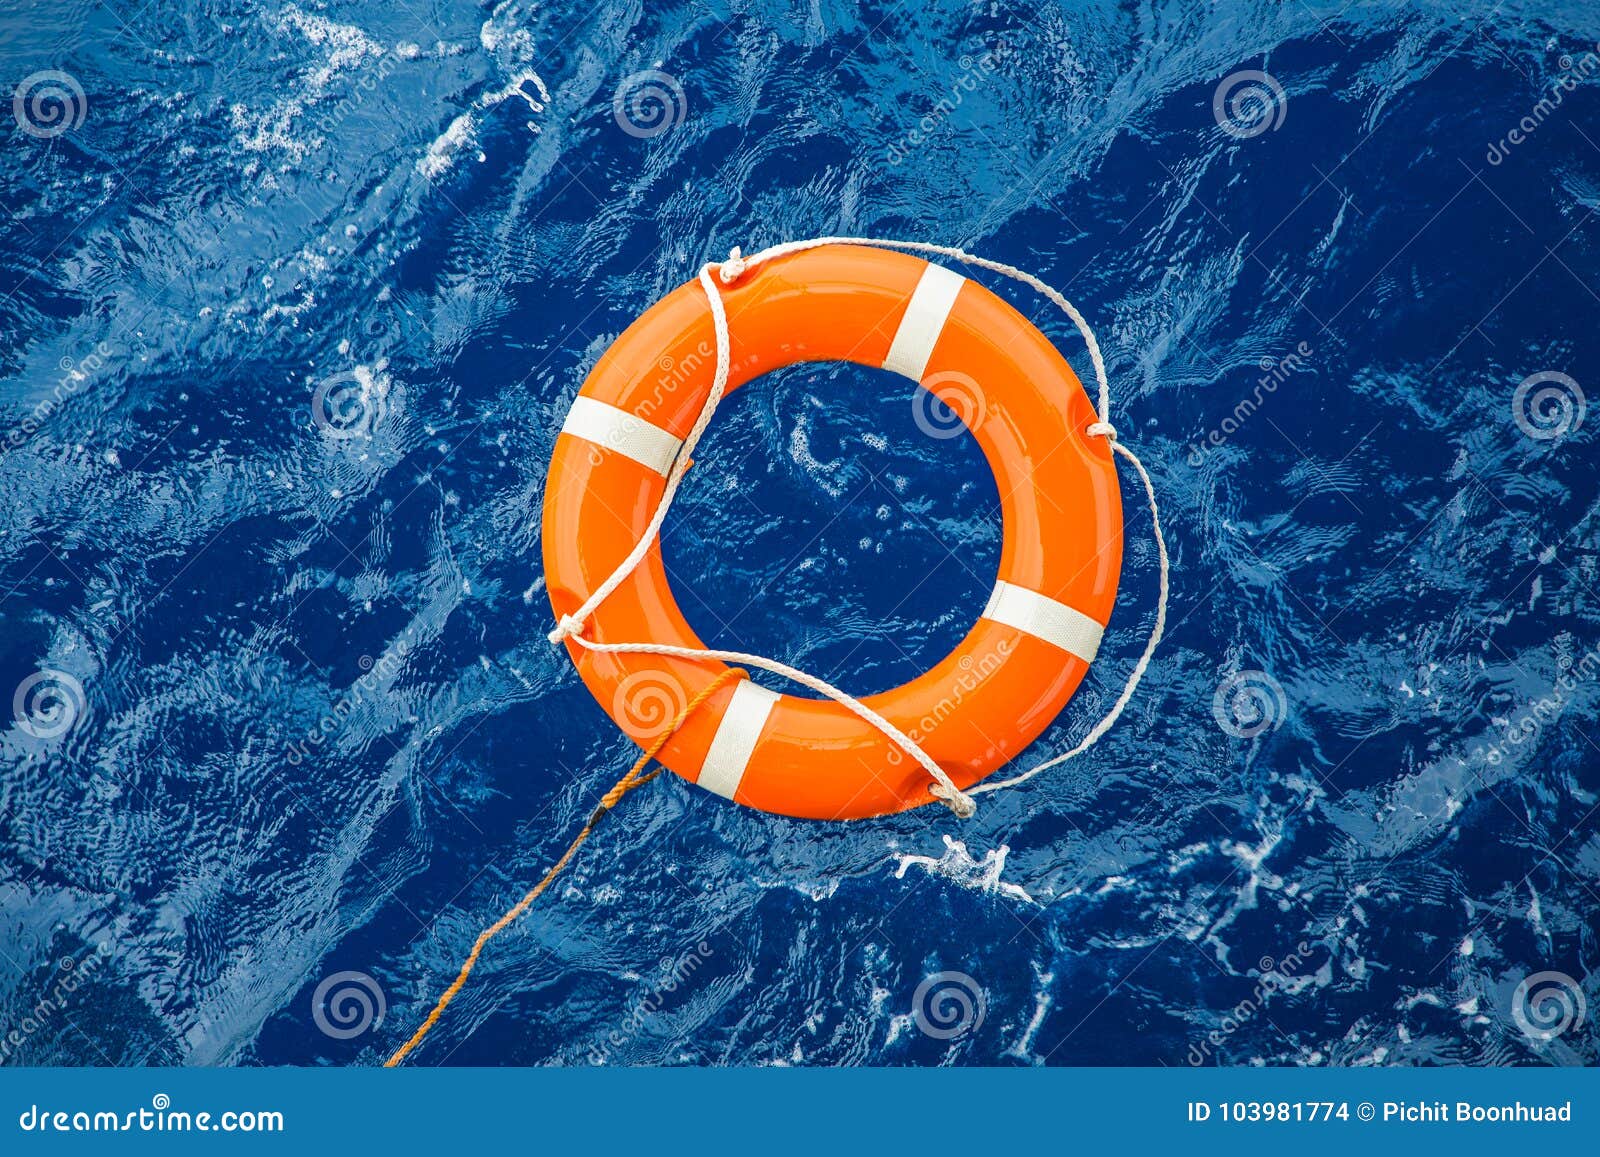 safety equipment, life buoy or rescue buoy floating on sea to rescue people from drowning man